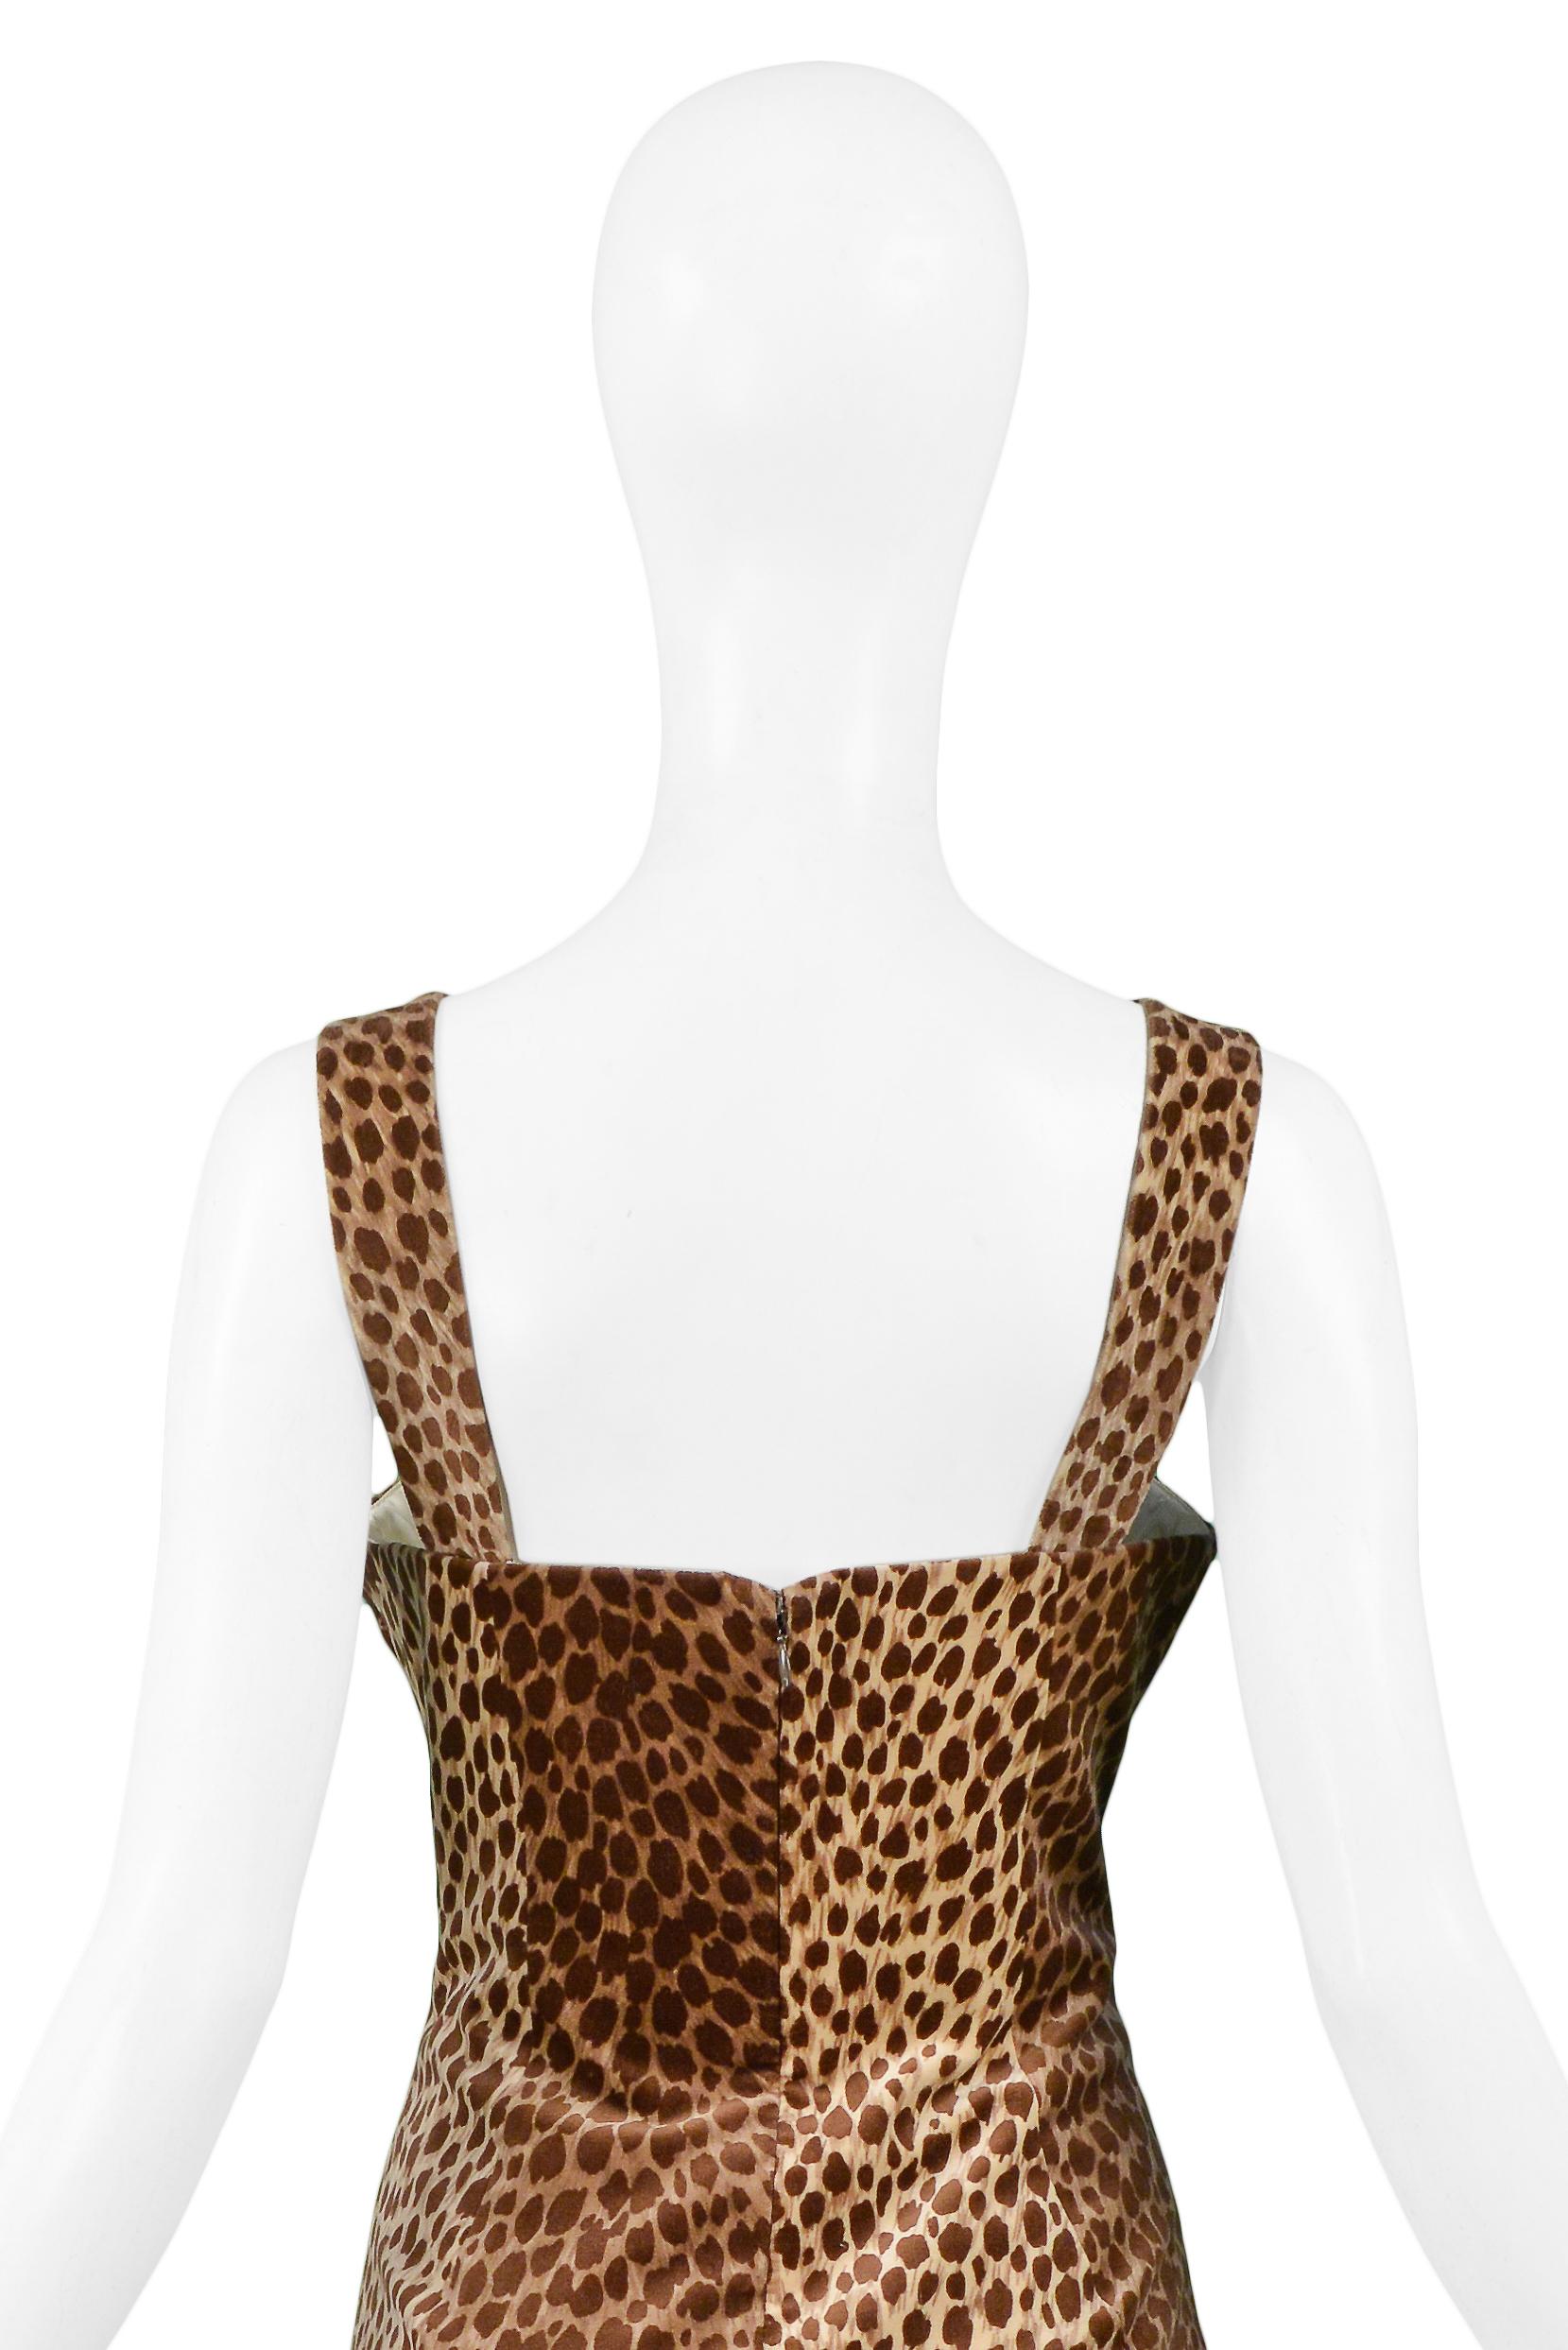 Dolce & Gabbana Cotton Velvet Leopard Print Cocktail Dress 1996-97  In Excellent Condition In Los Angeles, CA